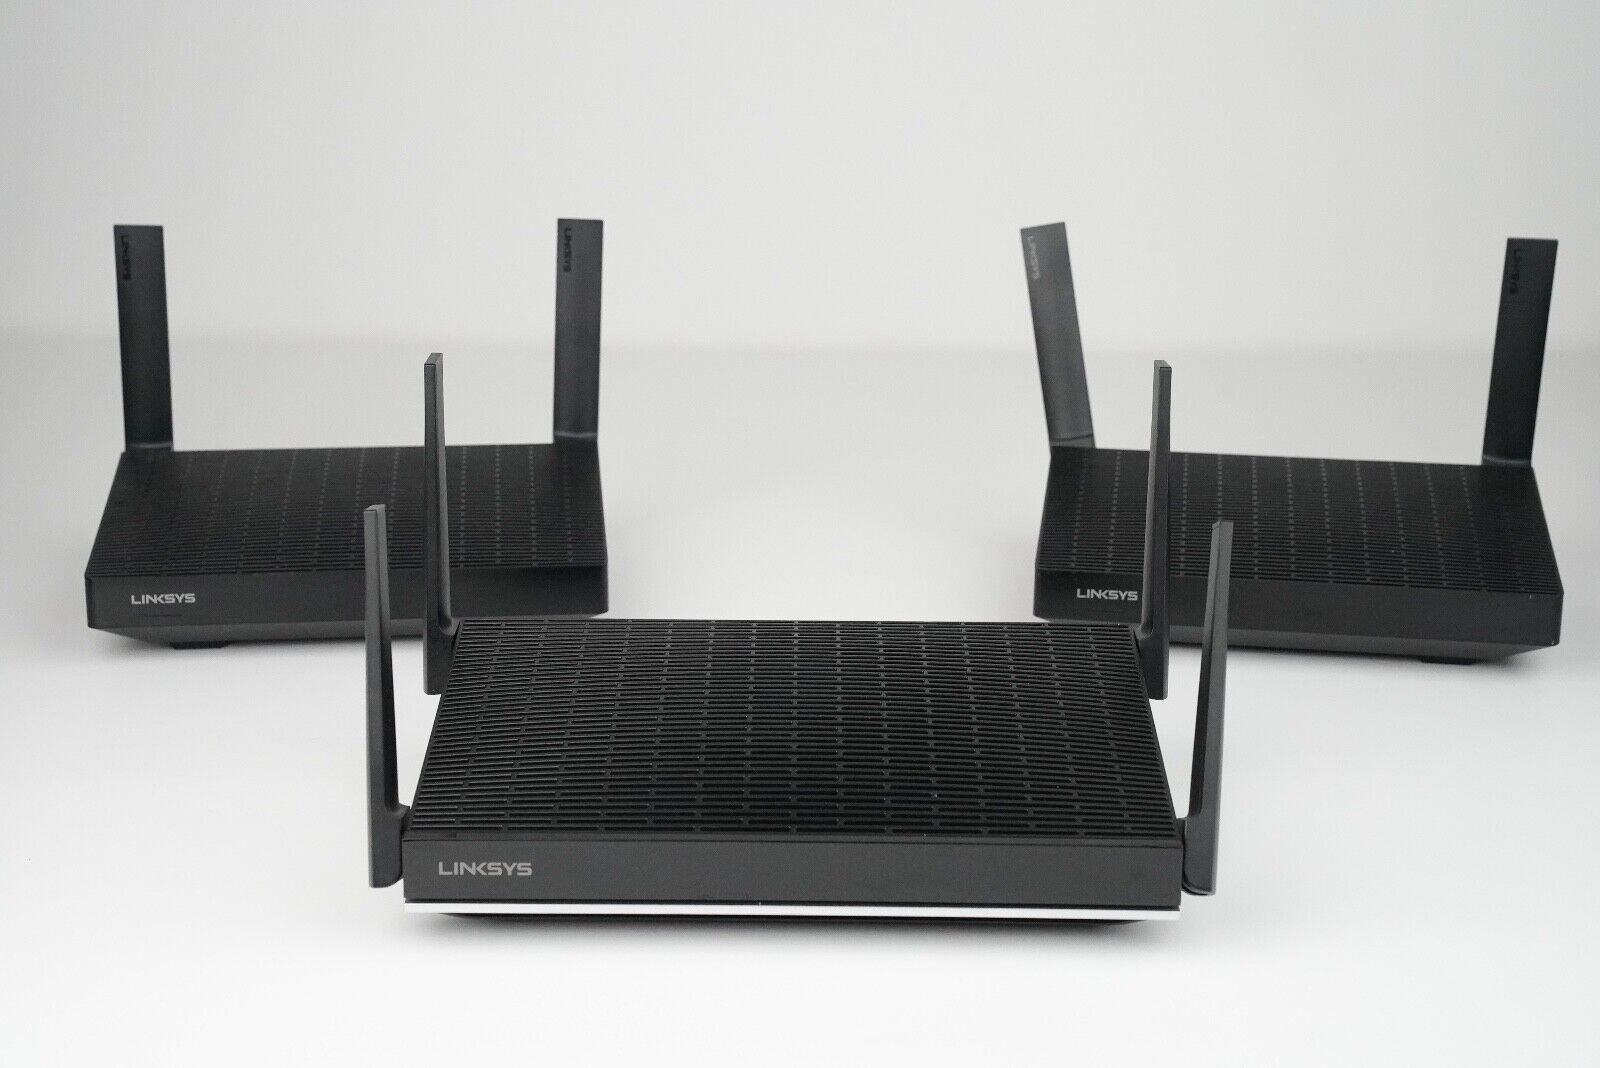 Linksys Mesh Network Set MR9600 x1 M7200 x2 Small Business Network Solution